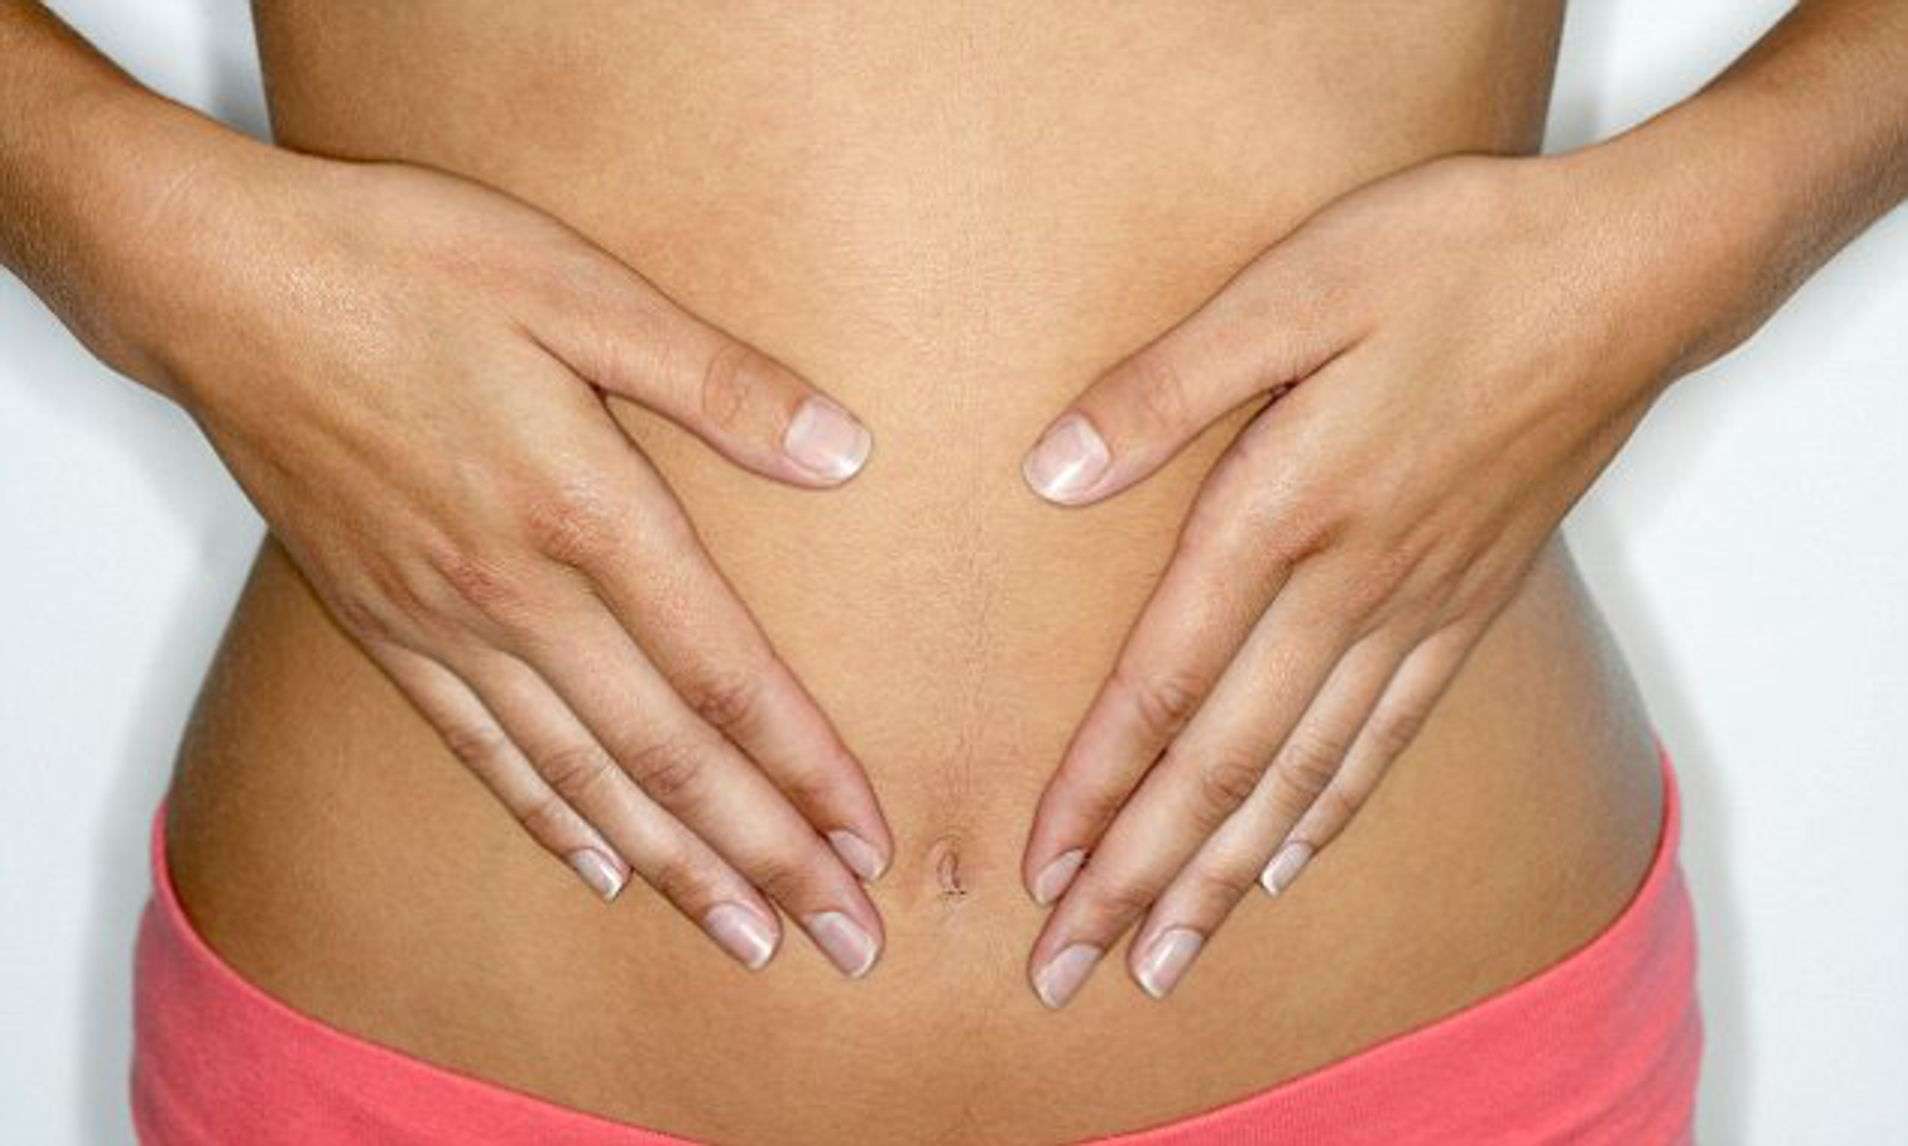 Belching Bloating Abdominal Pain Loose Stools After Eating